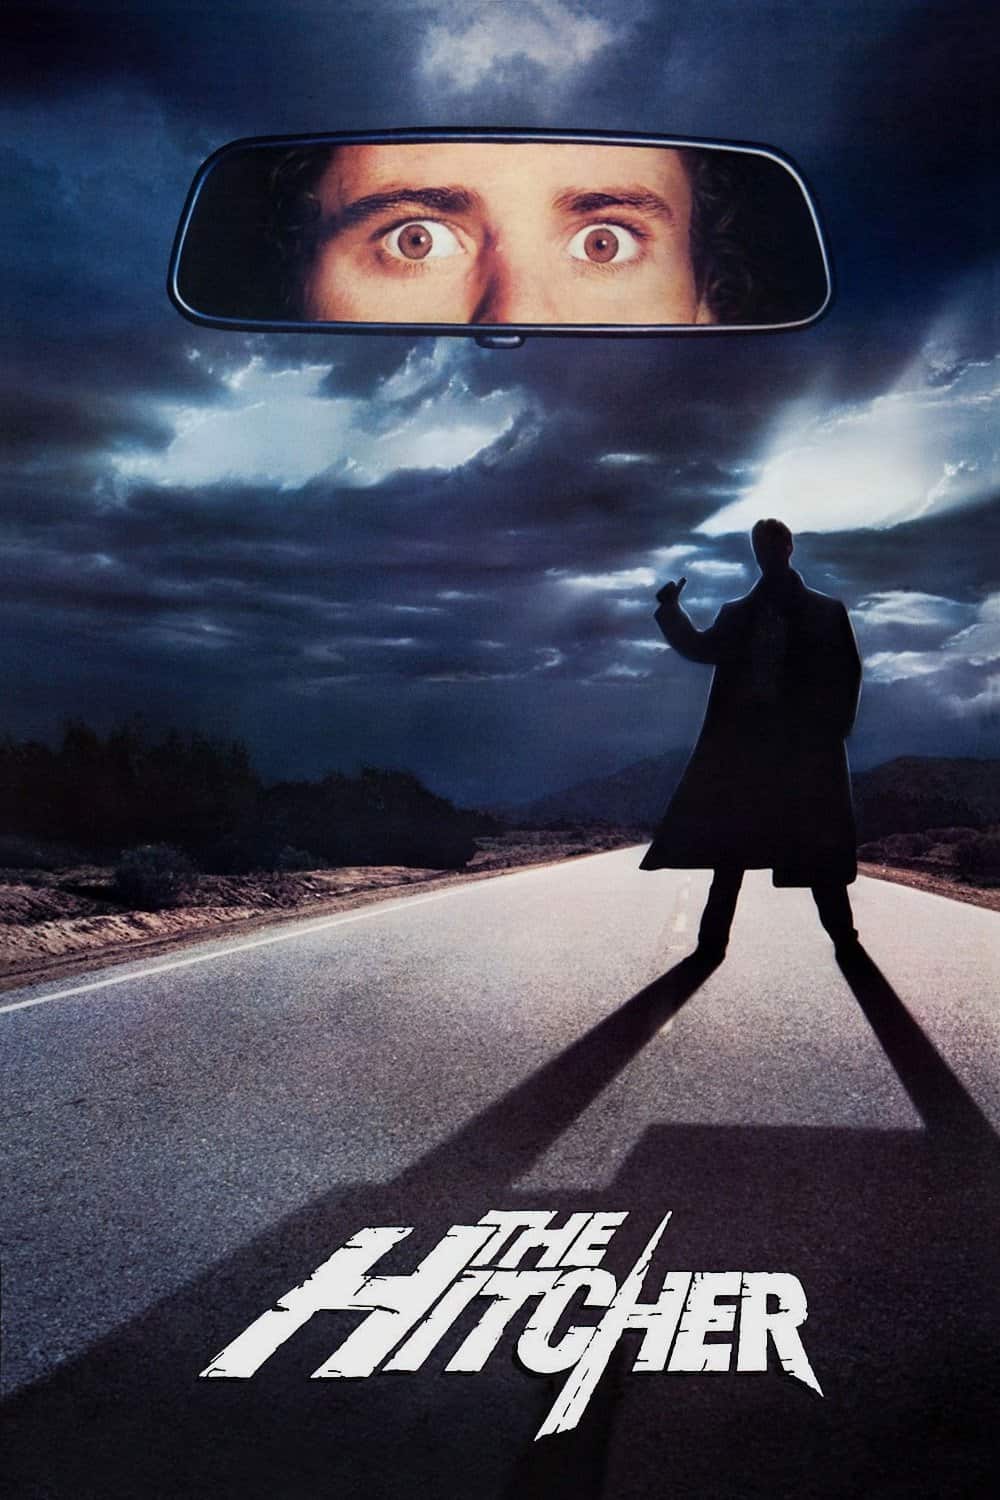 The Hitcher, 2007 